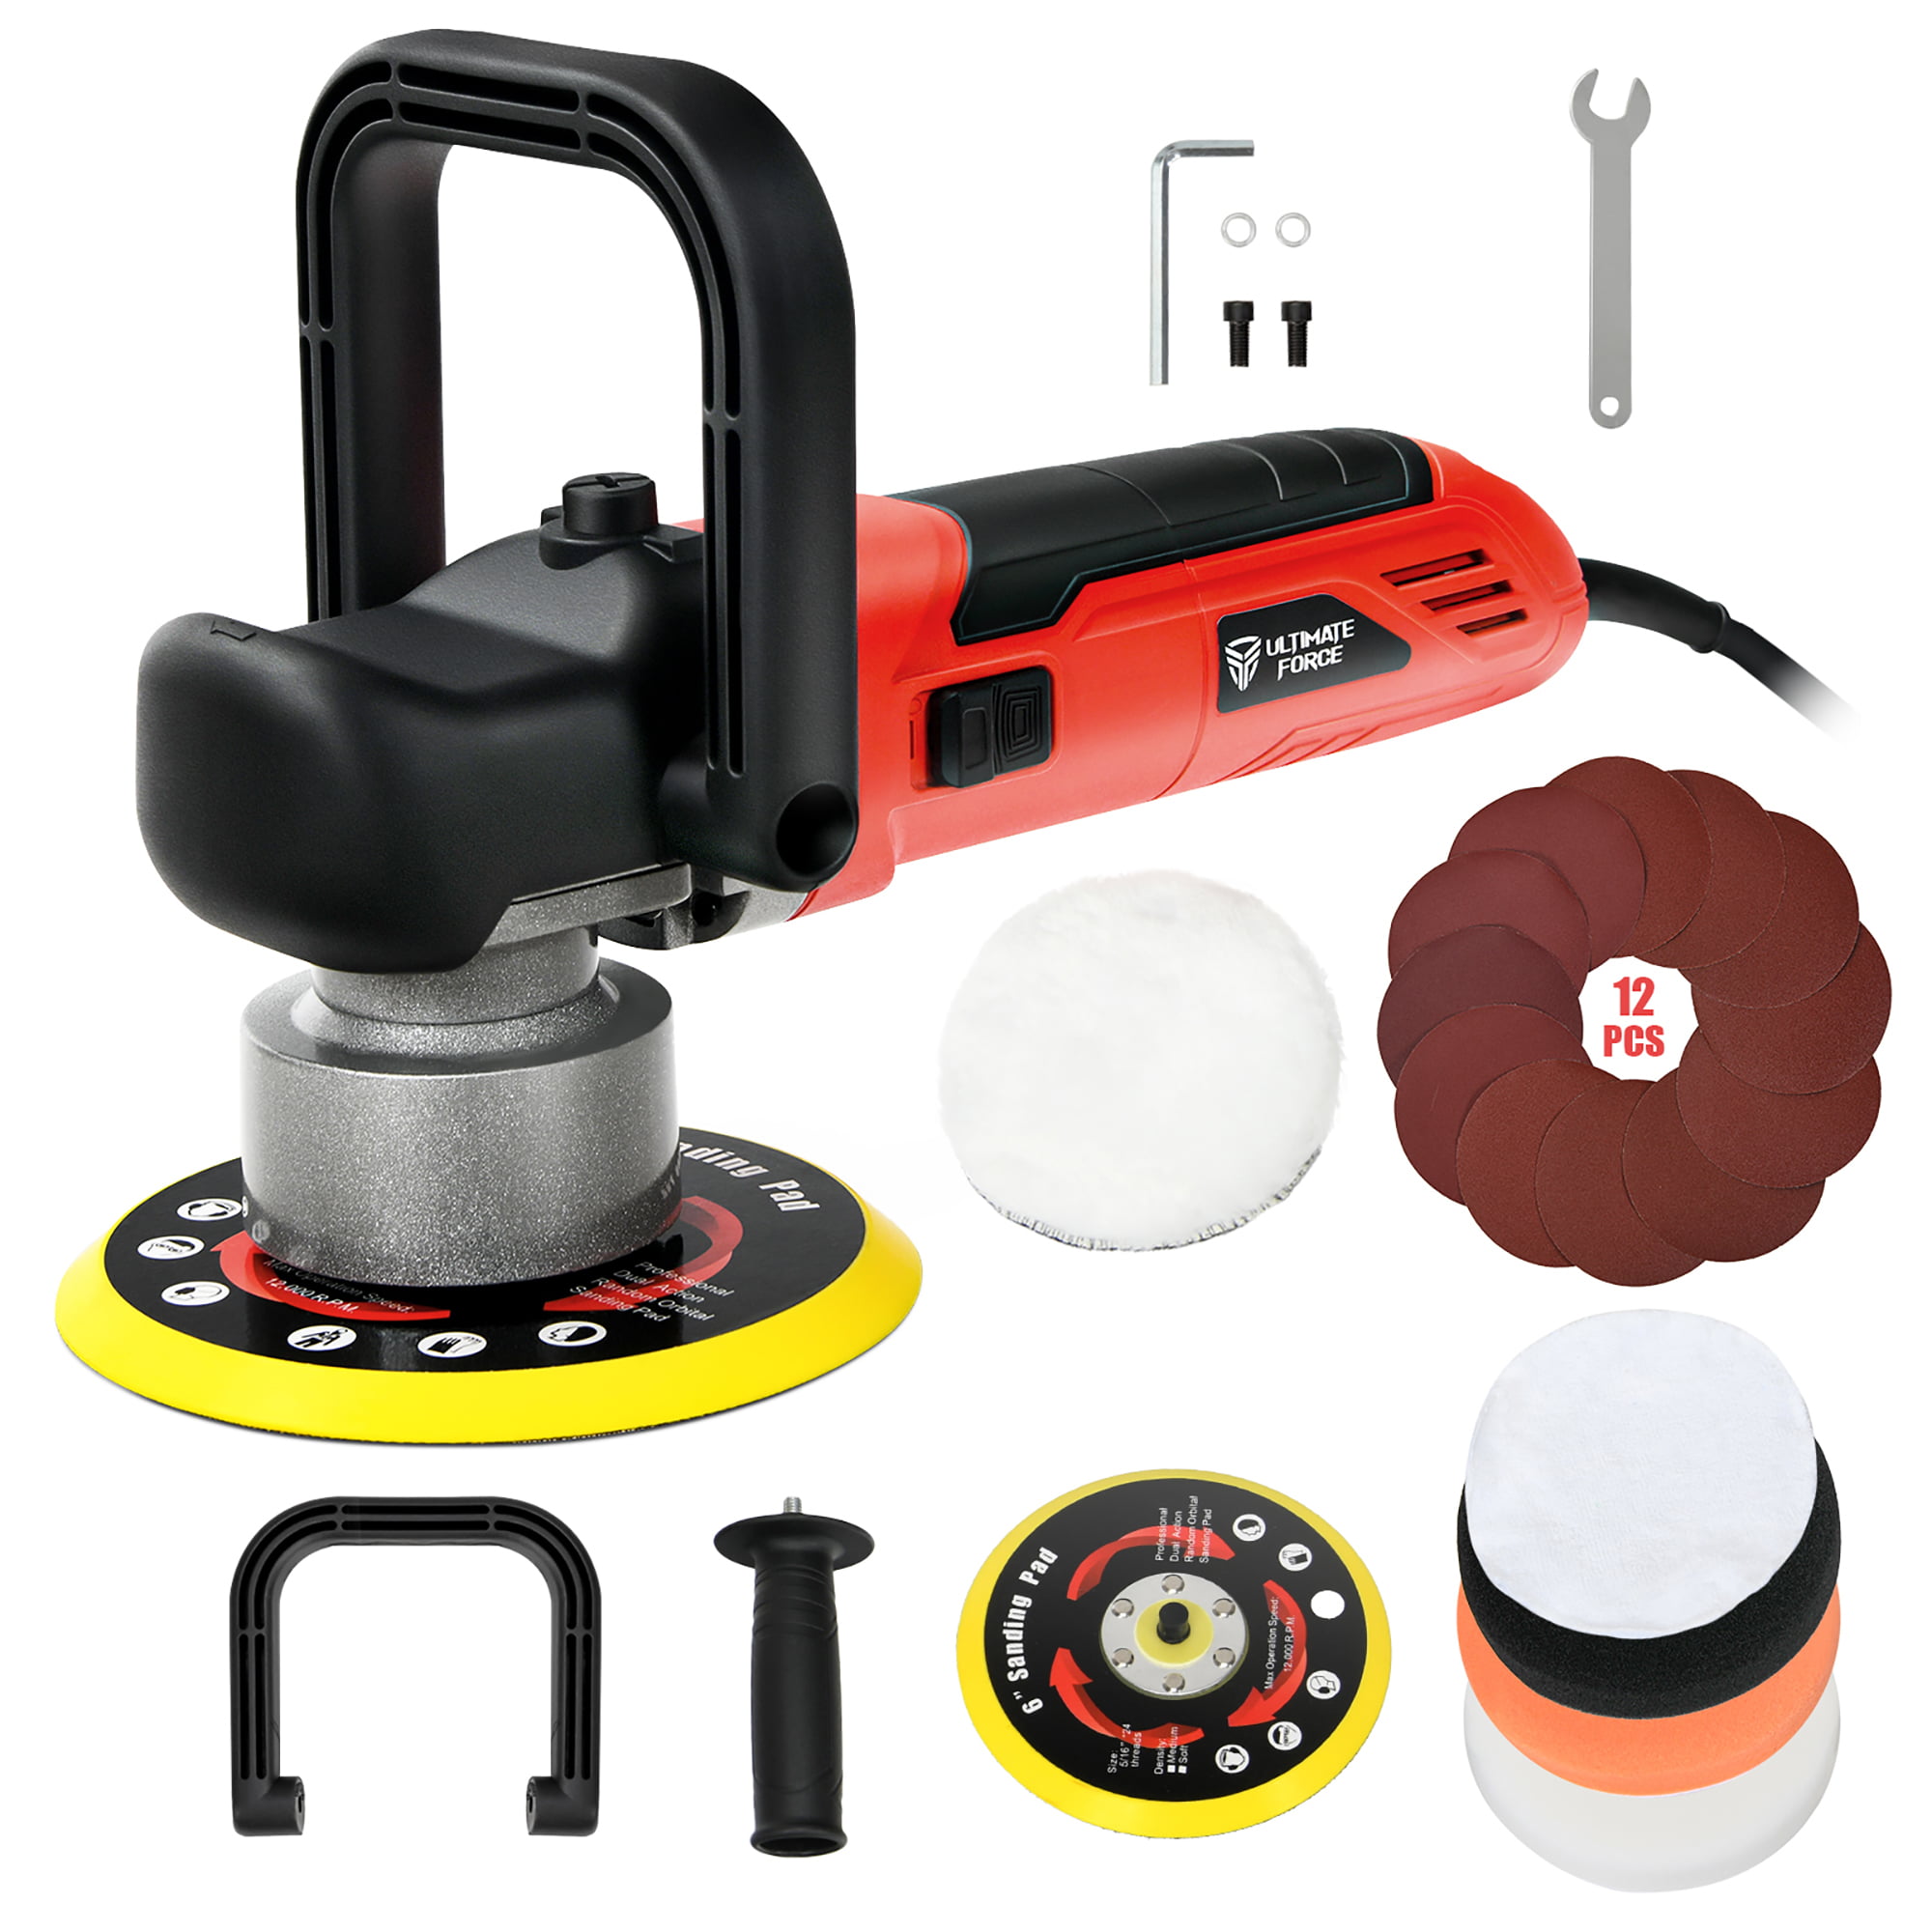 Buff Polish Car Polisher Buffer Sander,Rotating 7” Buffer Kit Buffing Pad Fix Paint Imperfections & Detail Car Auto Paint Variable Speed Switch